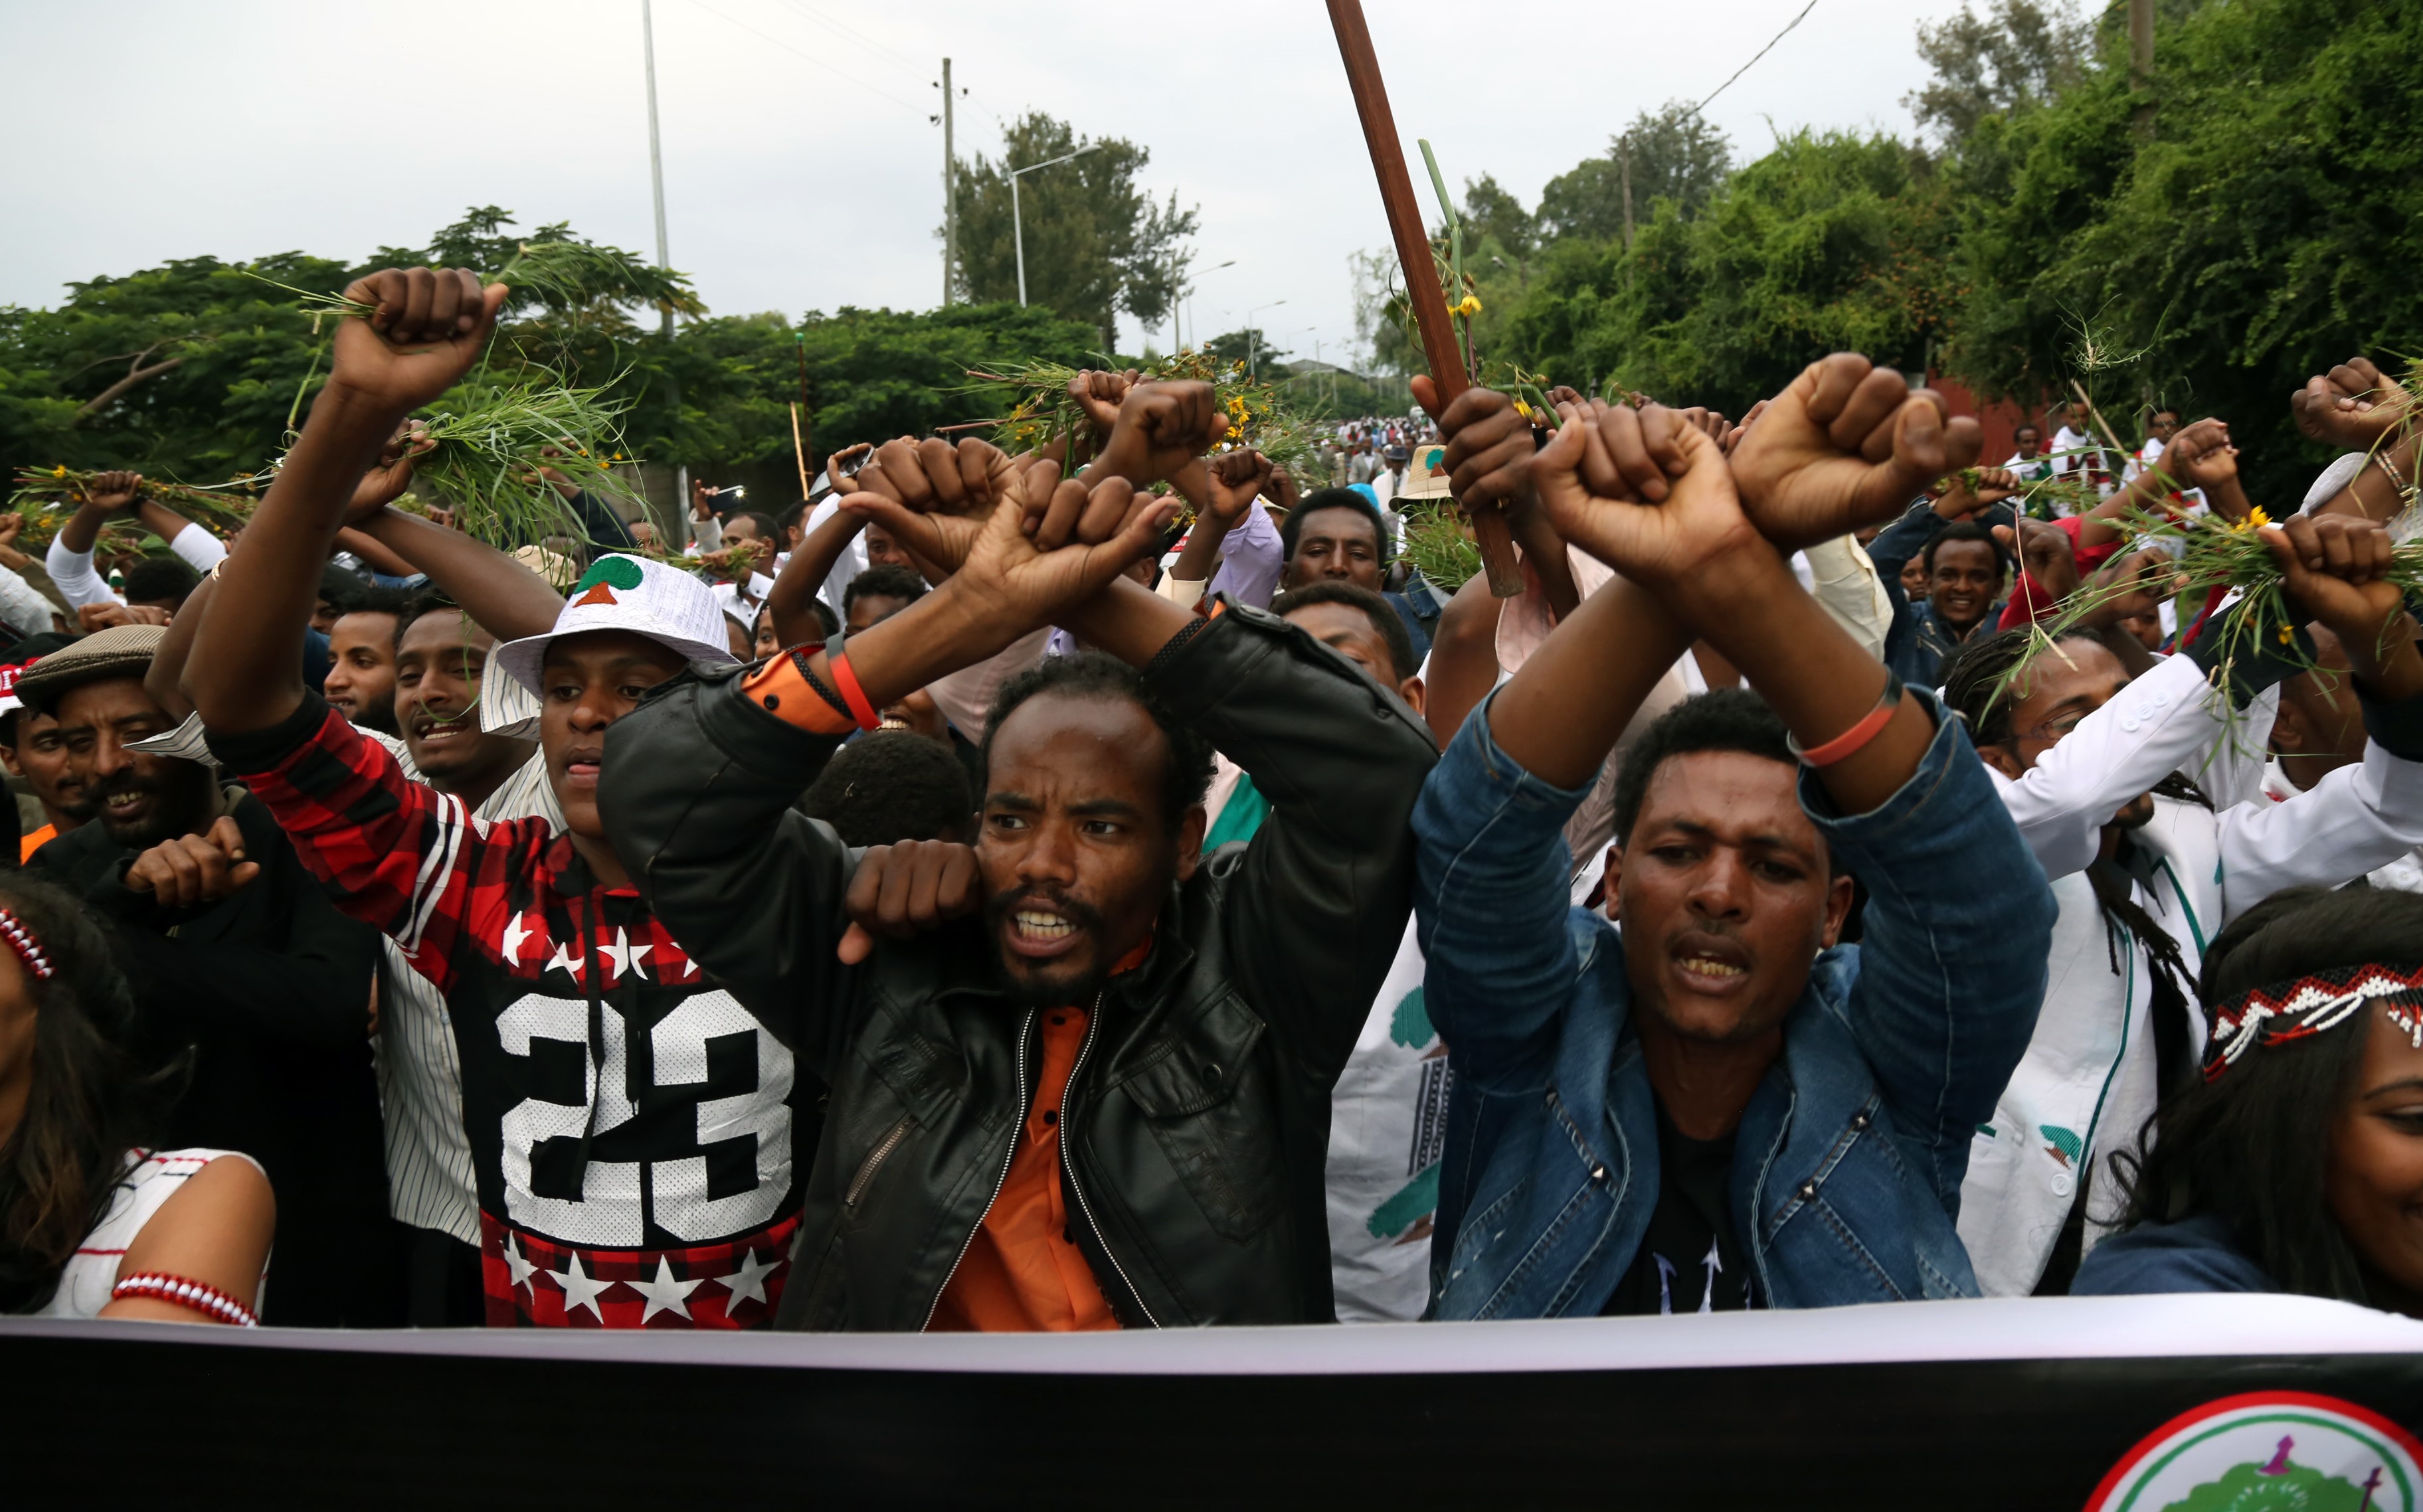 Oromo people stage a protest against government during the Oromo new year holiday Irreechaa' near the Hora Lake at Dberzit town in Addis Ababa, Ethiophia on October 2, 2016. (Anadolu Agency—Getty Images)